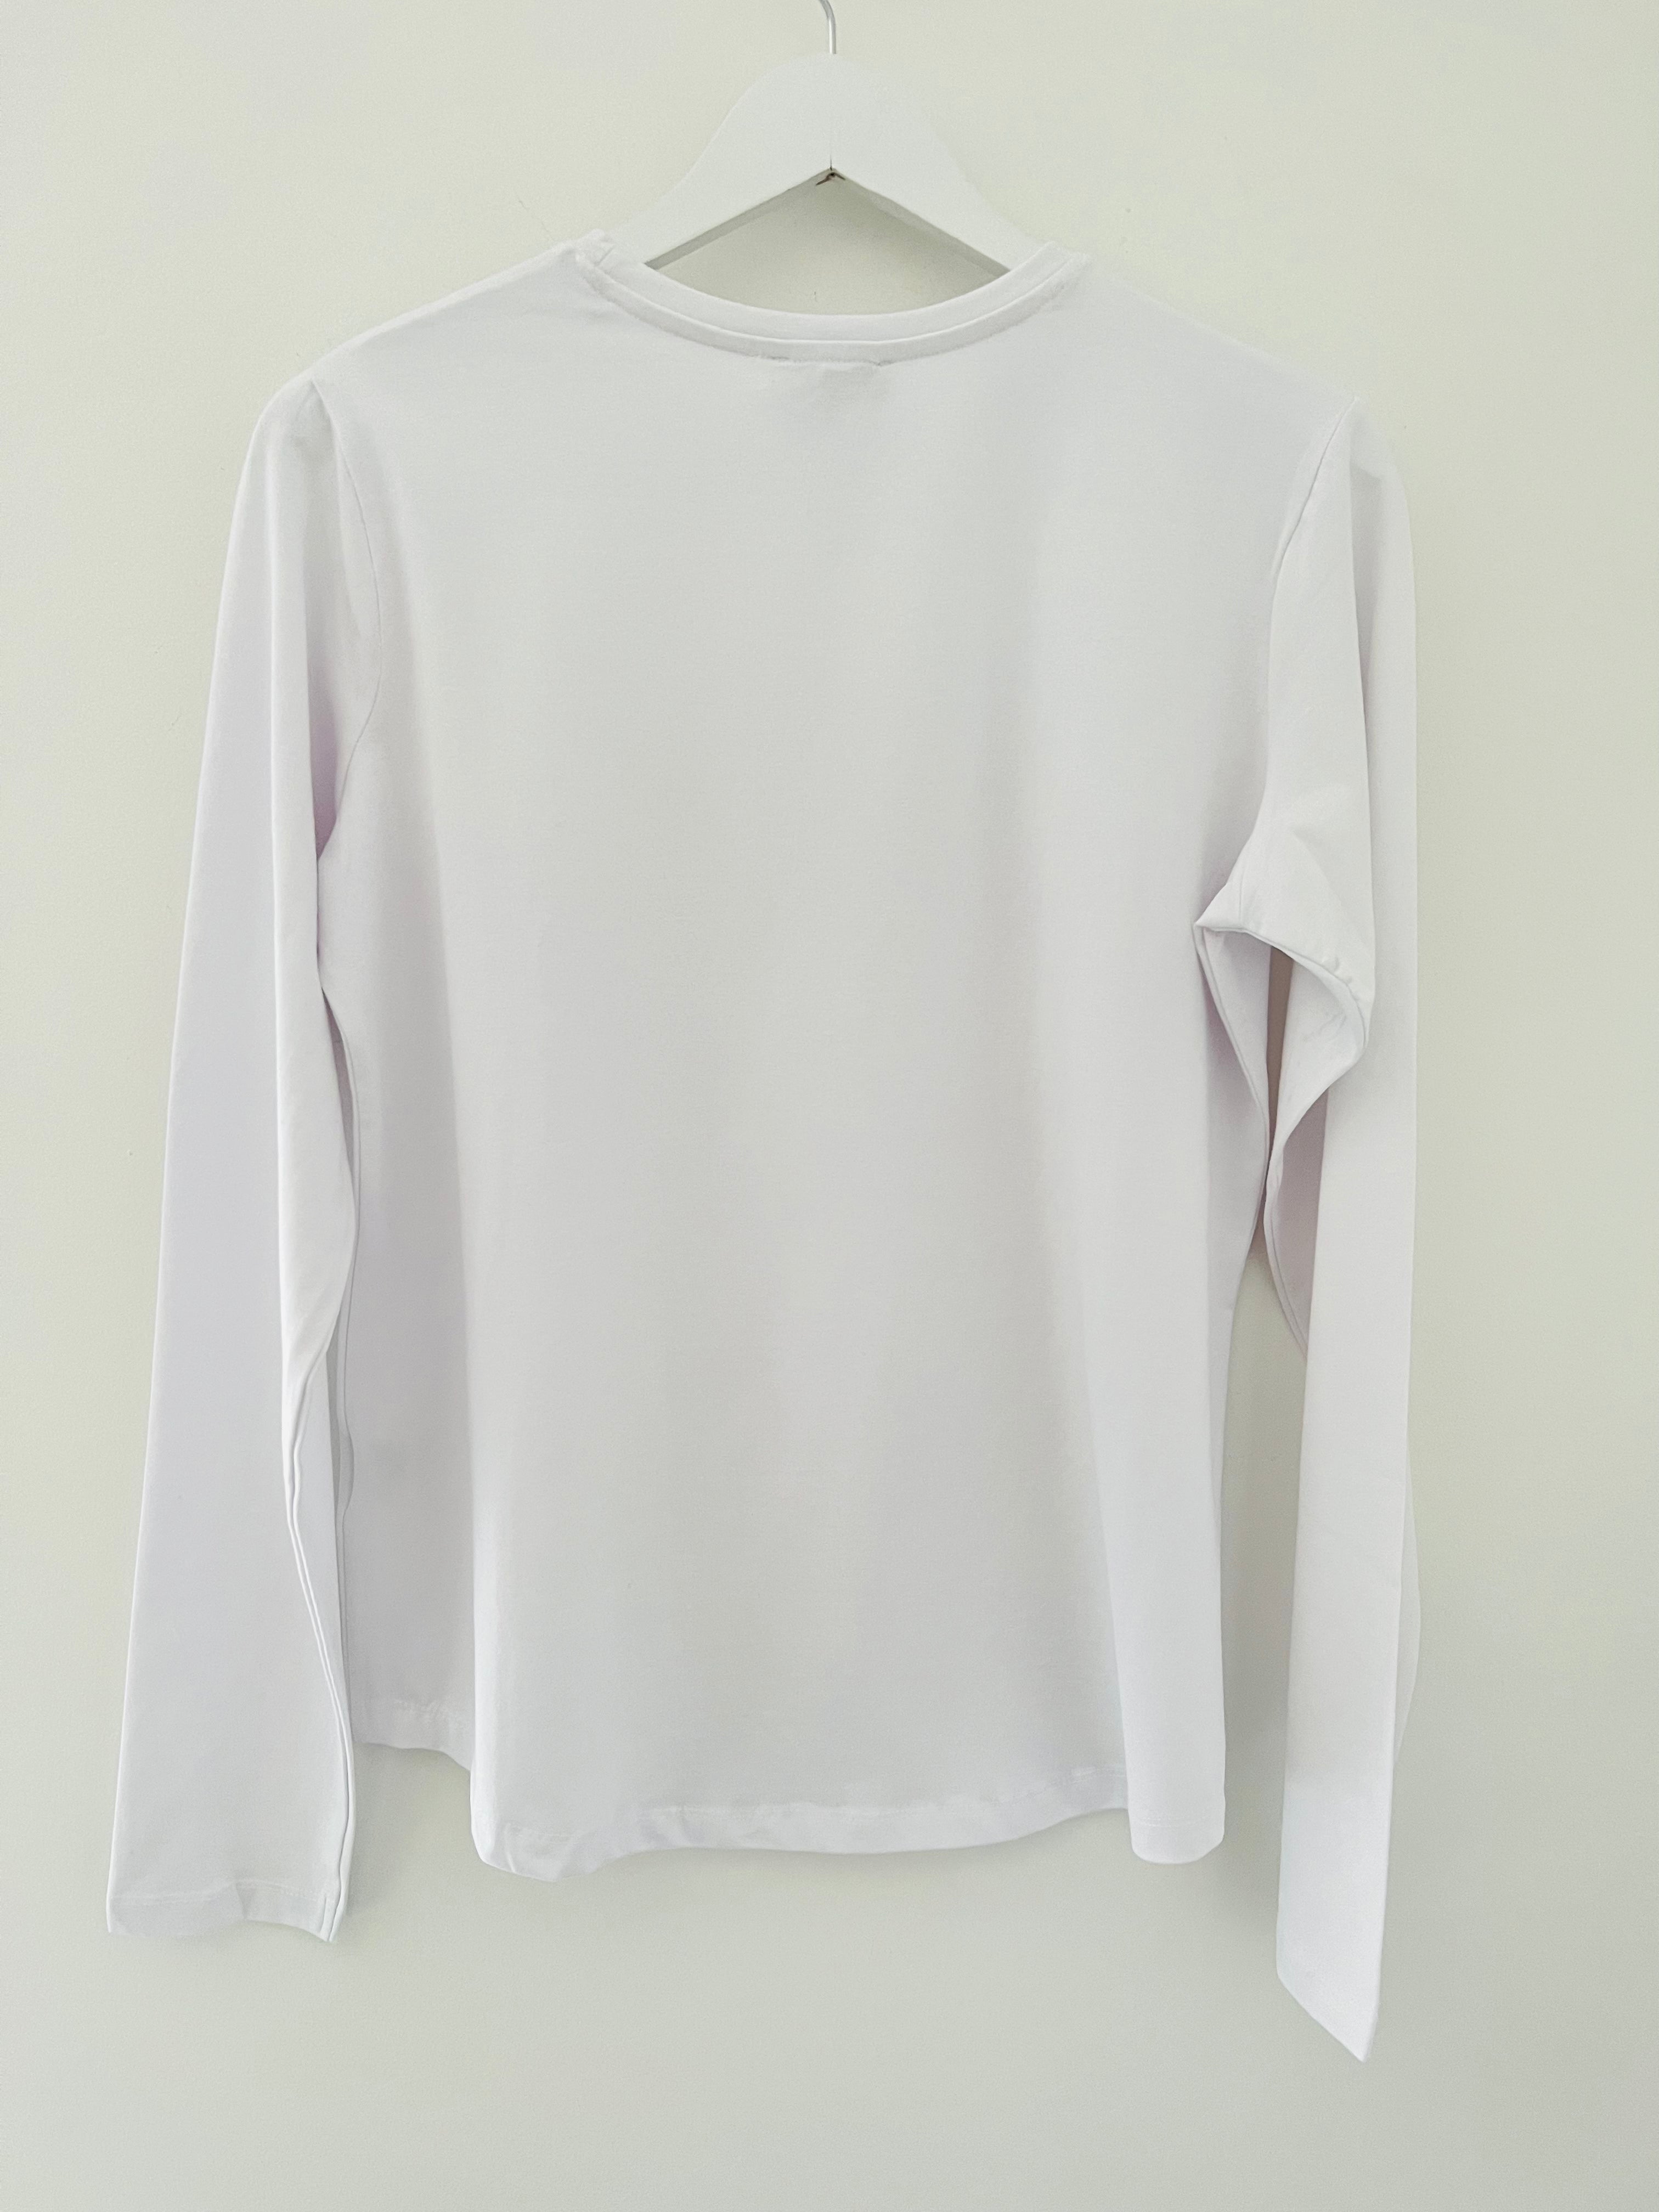 White Long Sleeve Top with Champagne Glitter Star